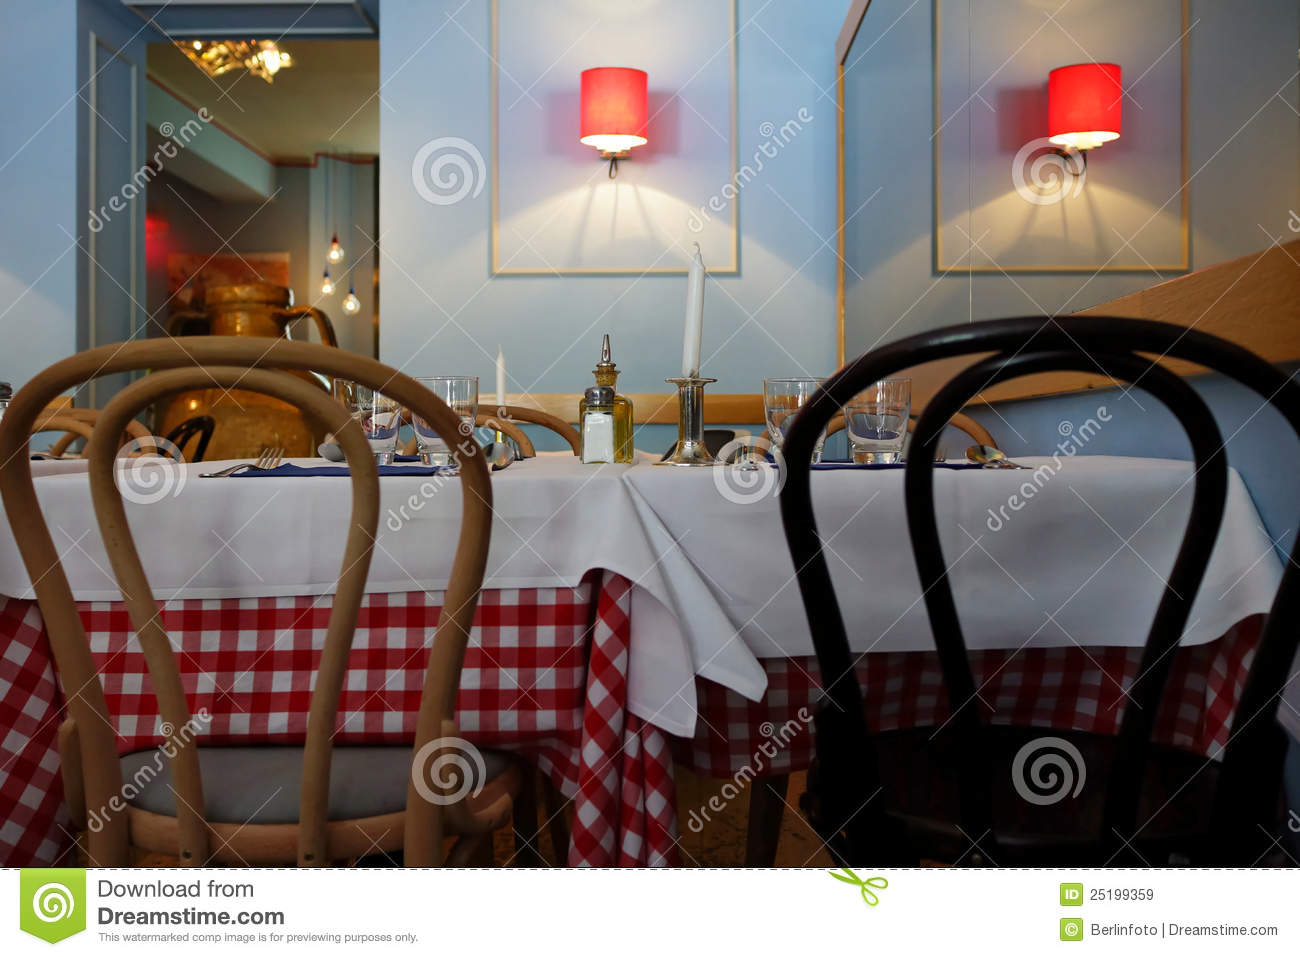 Tables In Italian Restaurant Royalty Free Stock Images   Image    